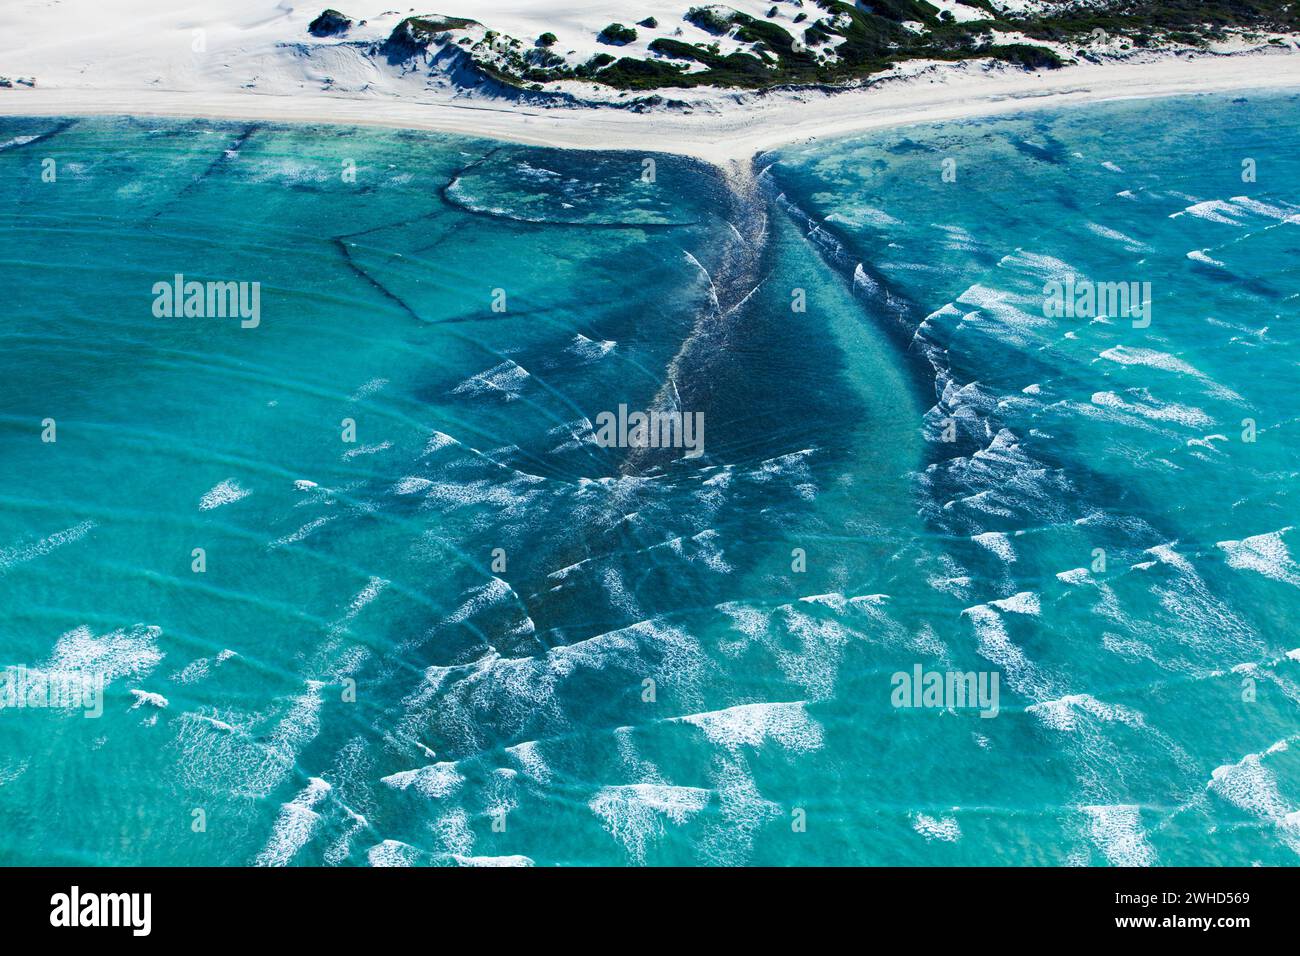 Abstract, Aerial view, Africa, beauty in nature, blue background, Coast, Coastal beach, daytime, landscape, nature, no people, Ocean, outdoors, Overberg, scenic, South Africa, Stone Fish Traps (ancient), water, Western Cape Province, Waves, Pattern Stock Photo